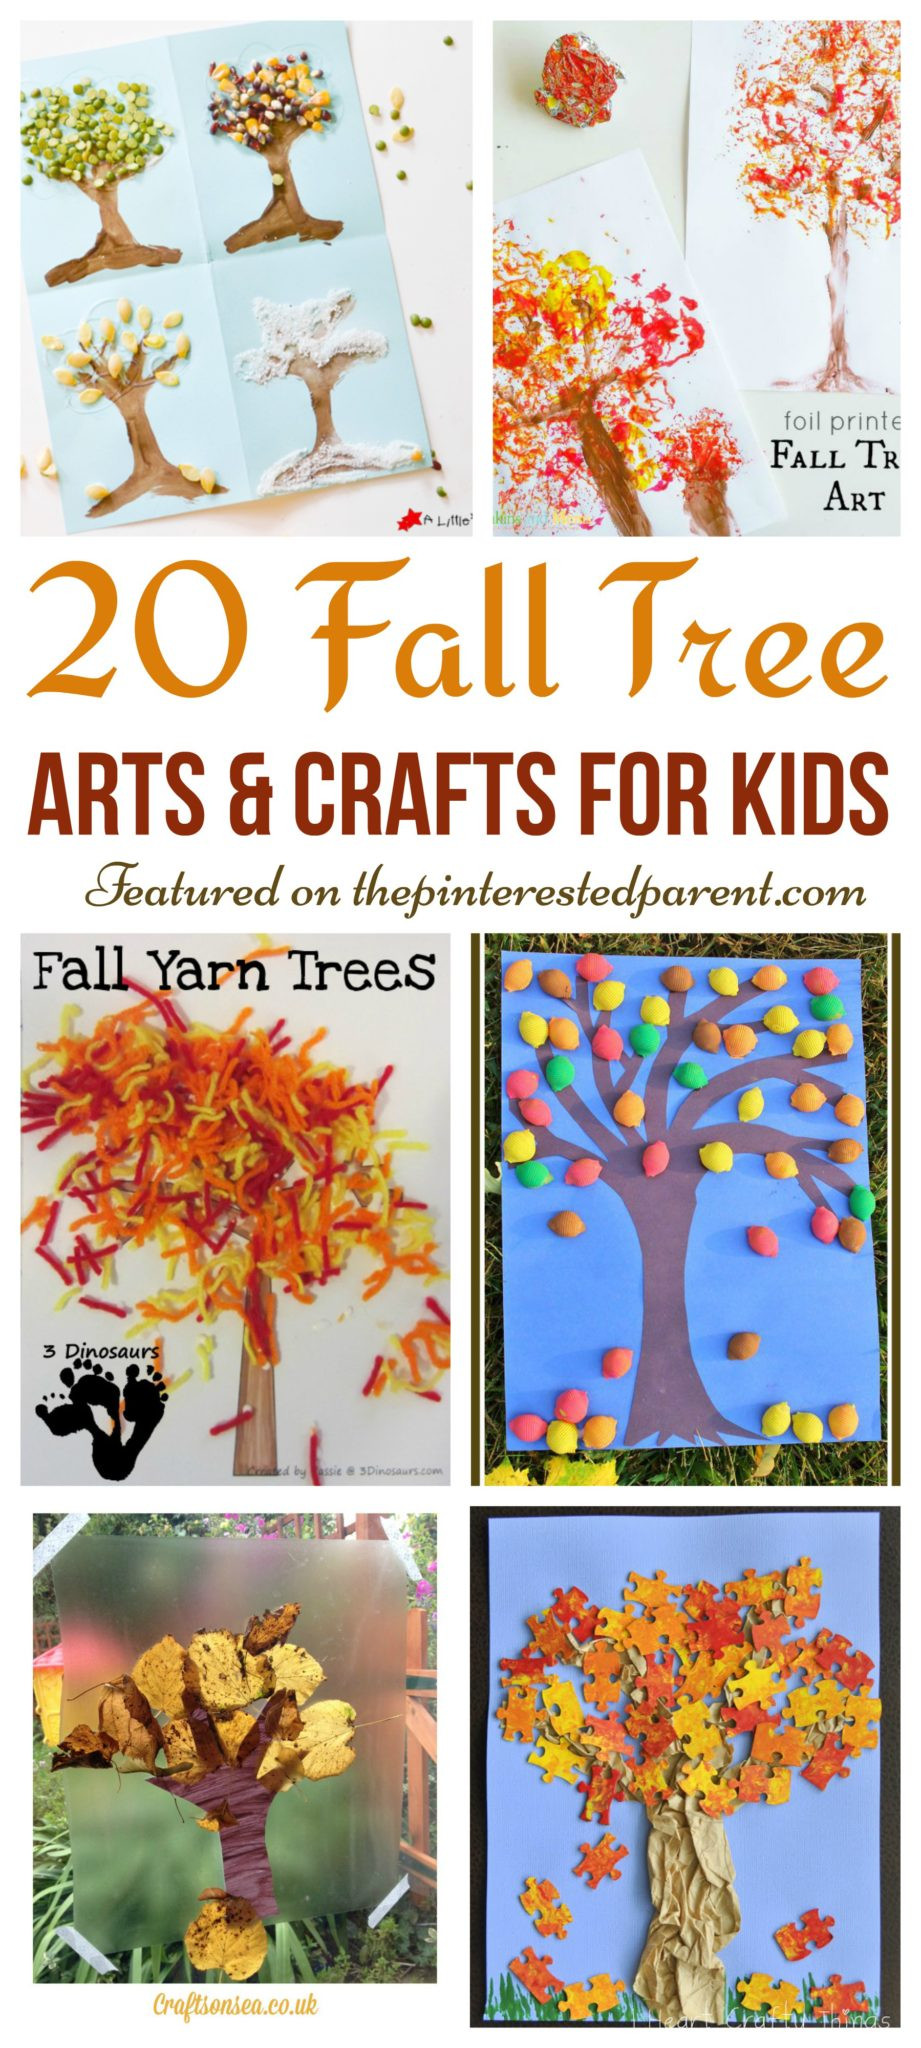 Art Crafts For Toddlers
 20 Fall Tree Arts & Crafts Ideas For Kids – The